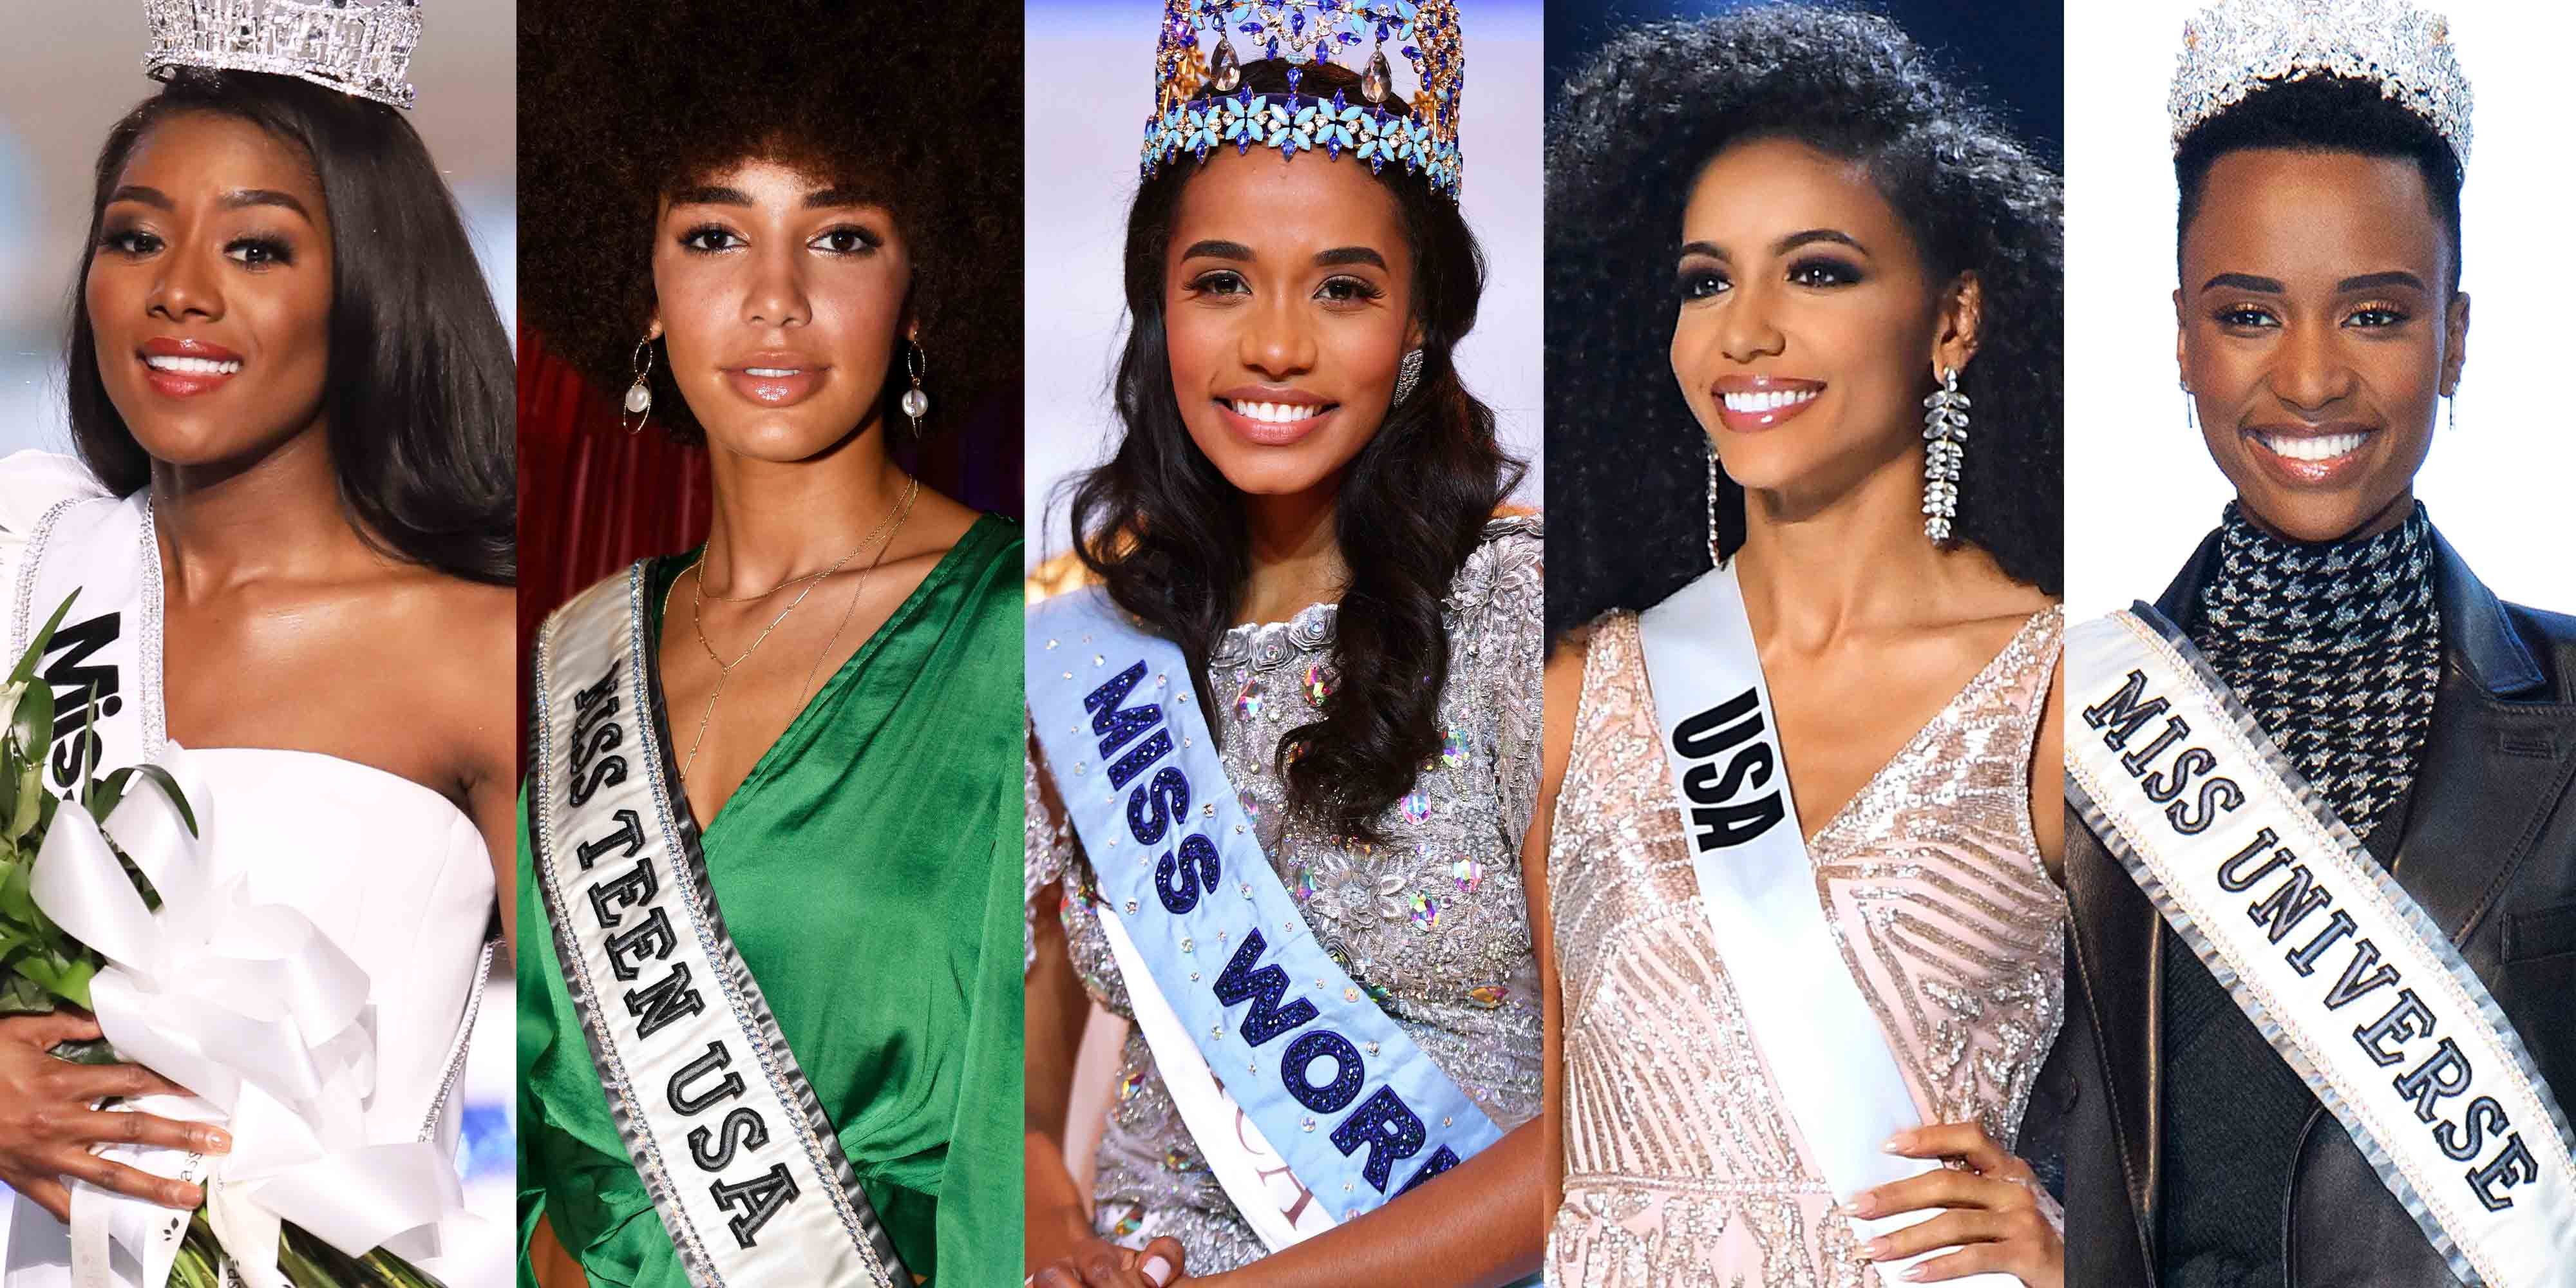 12 Beauty Secrets From Real Pageant Queens - Pageant Queen Makeup and Hair